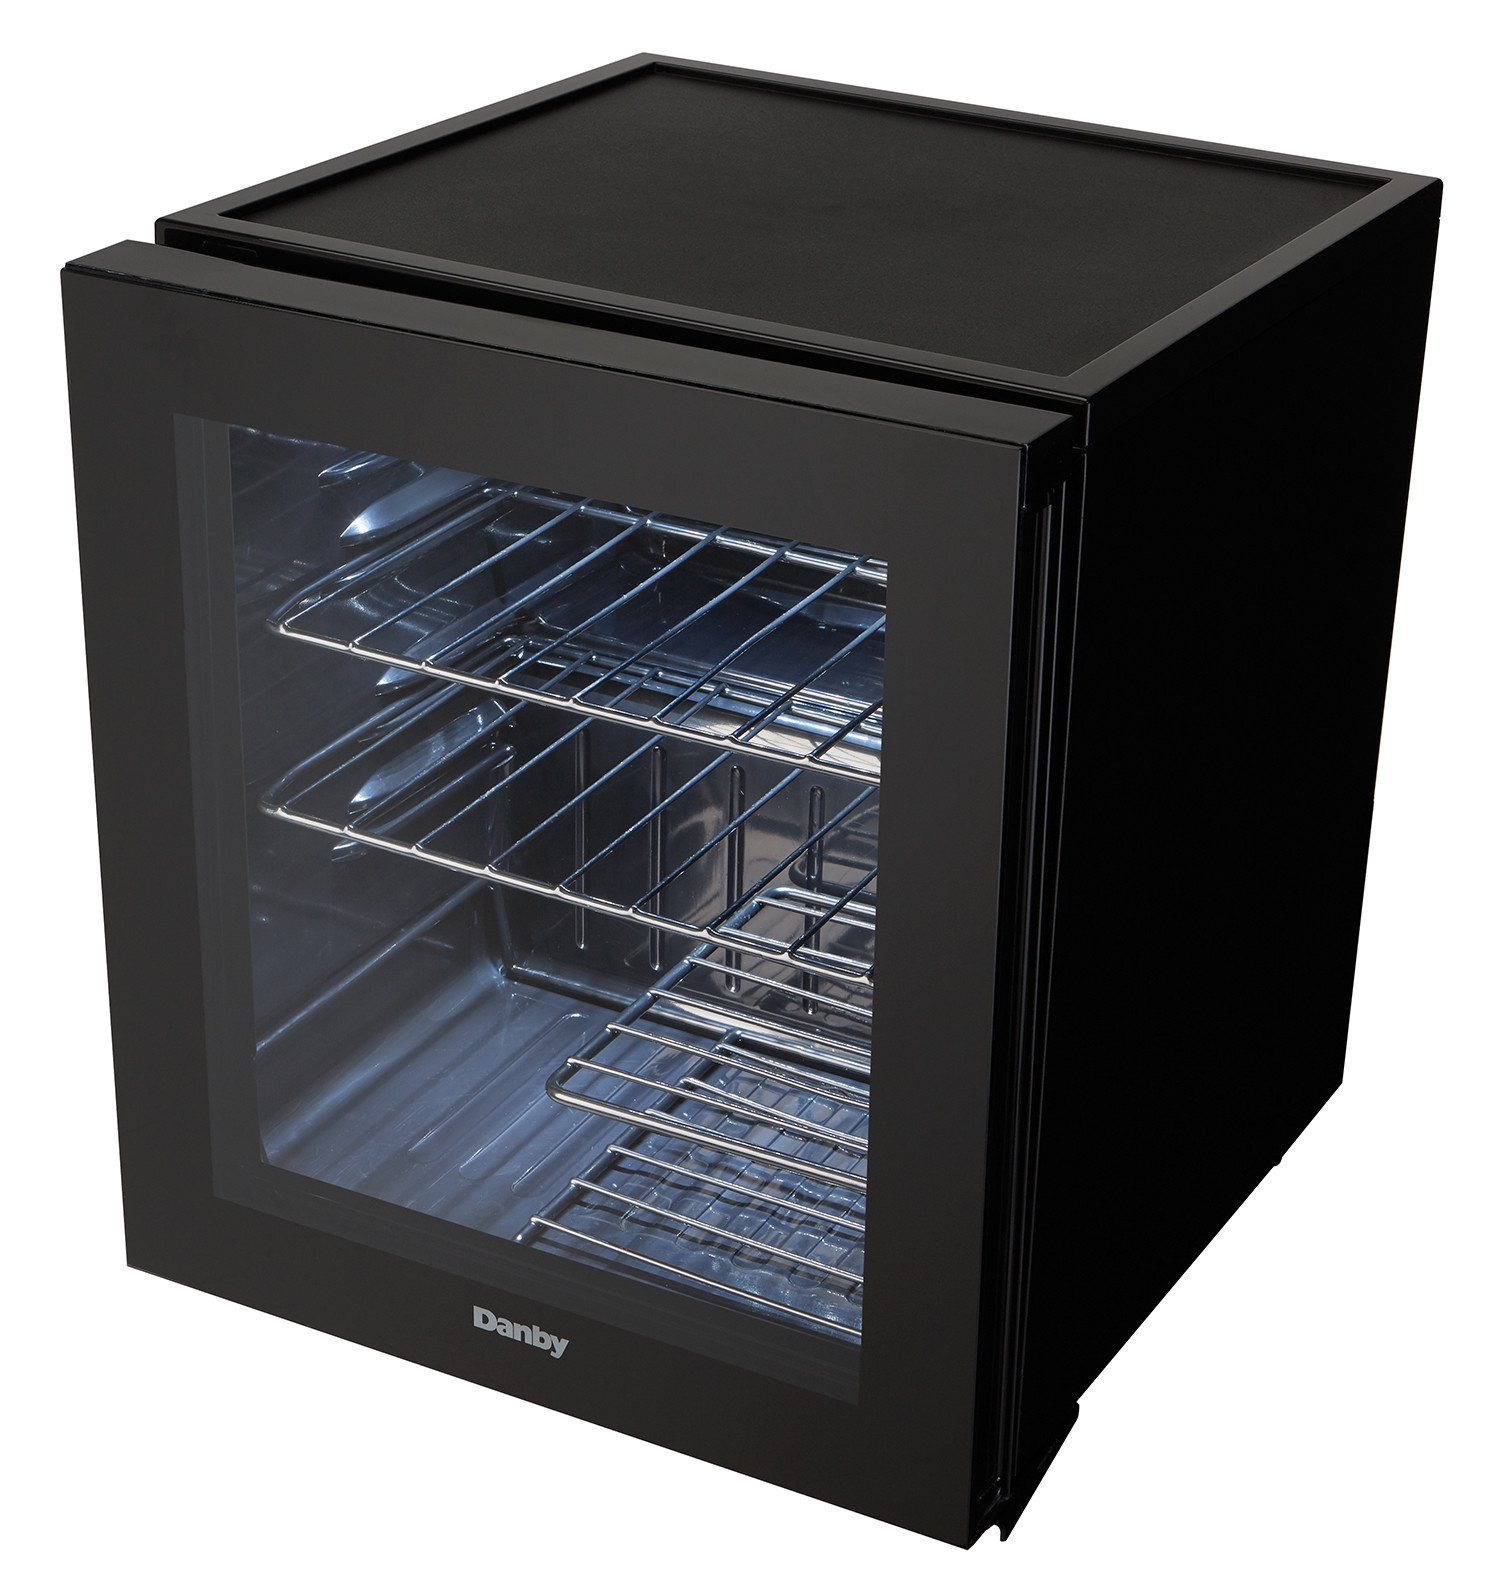 Danby 1.8 cft Free-Standing Wine Cooler in Black Reviews, Problems & Guides